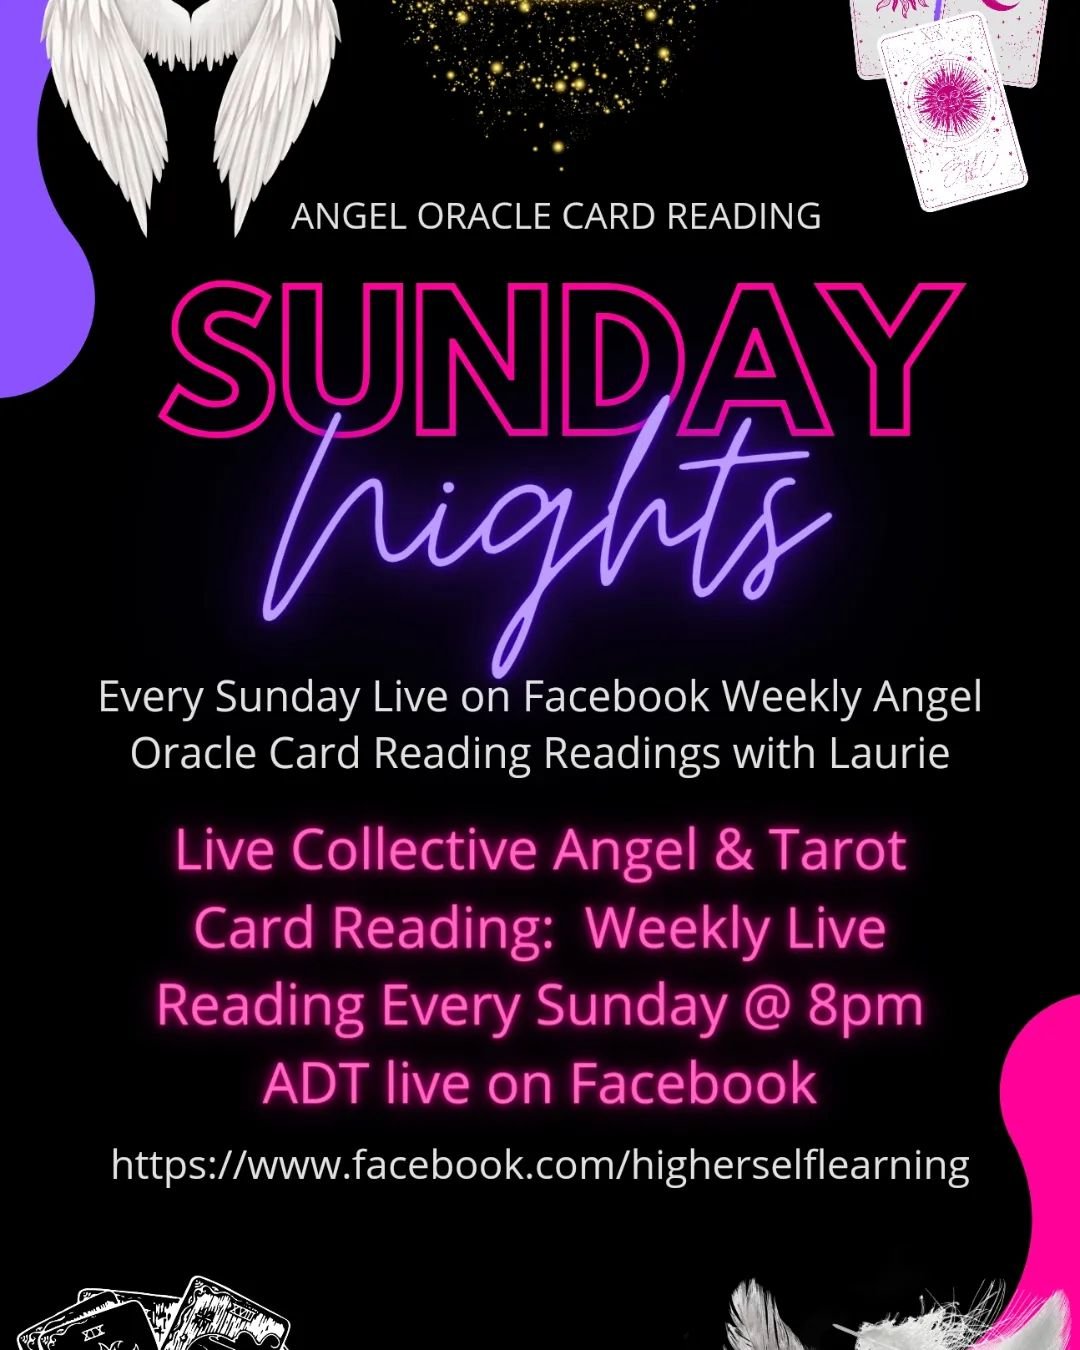 📣📣ANNOUNCEMENT EVERY SUNDAY 8PM 20-MINUTE LIVE ANGEL ORACLE &amp; TAROT CARD READING 🐉🦋

I will be going live every Sunday night for a 20-minute weekly card reading to receive divine guidance &amp; messages  from the angels and spirit guides, fin